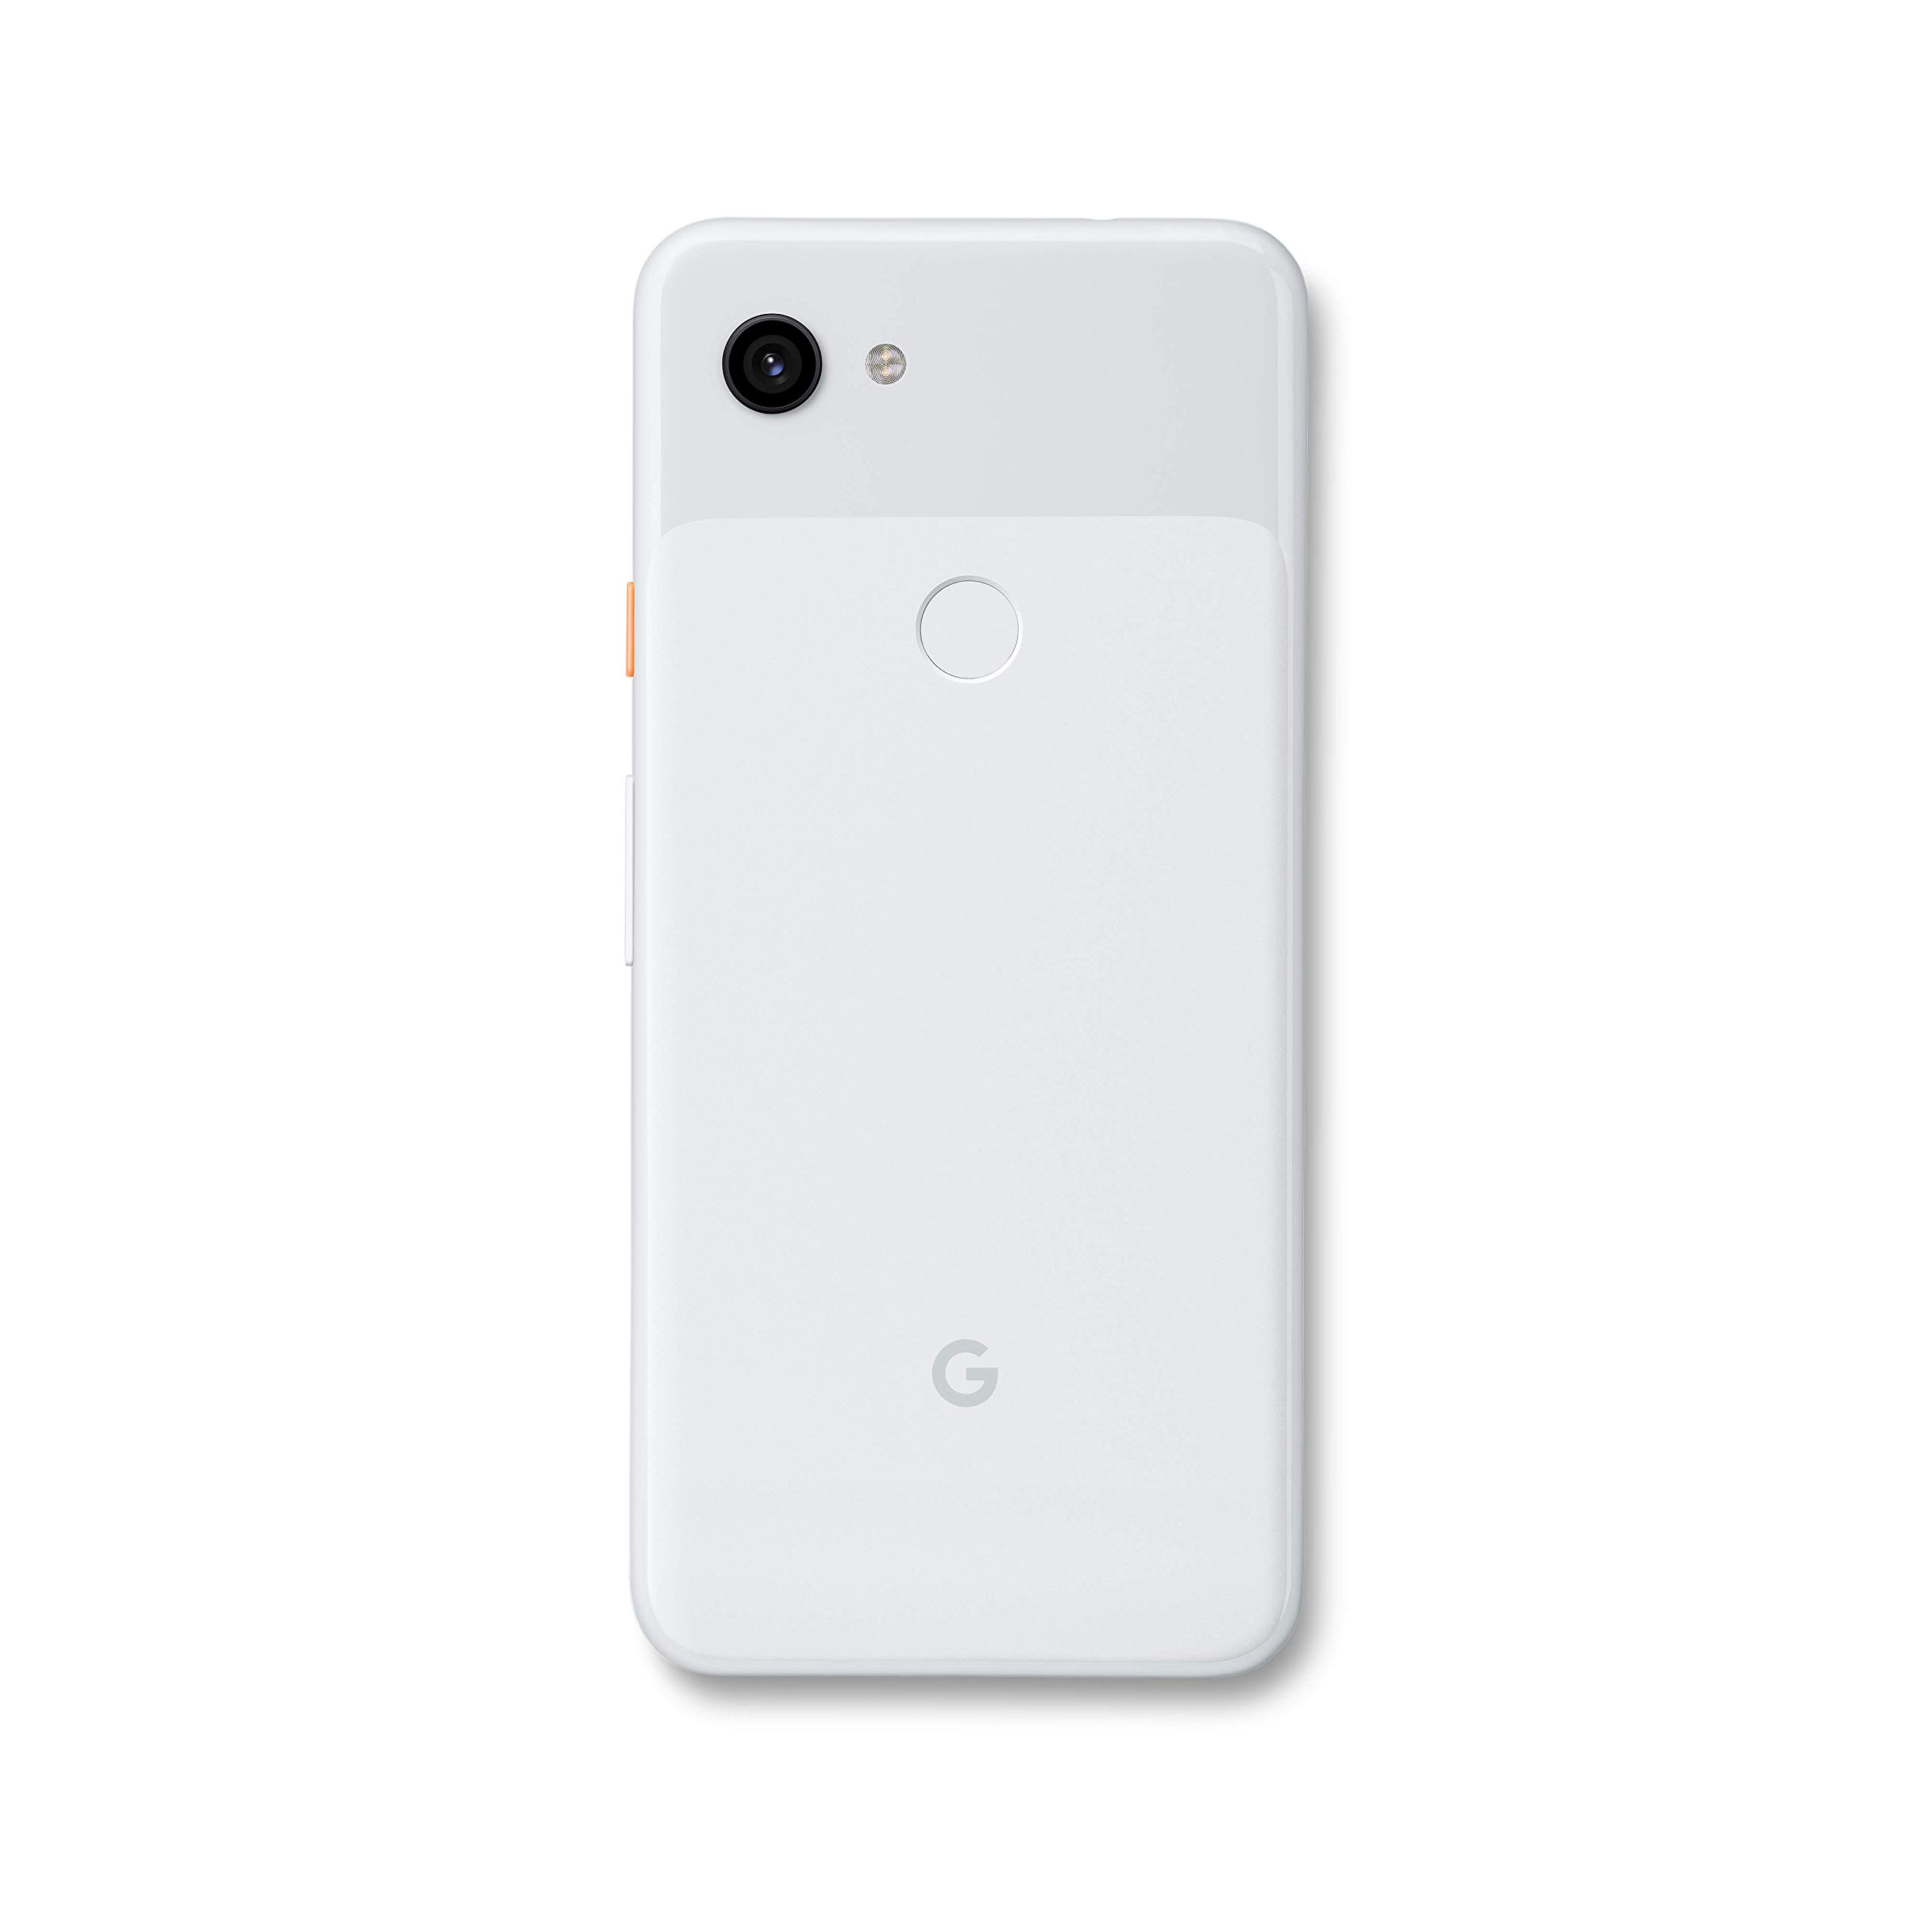 Google - Pixel 3a with 64GB Memory Cell Phone (Unlocked) - Clearly White